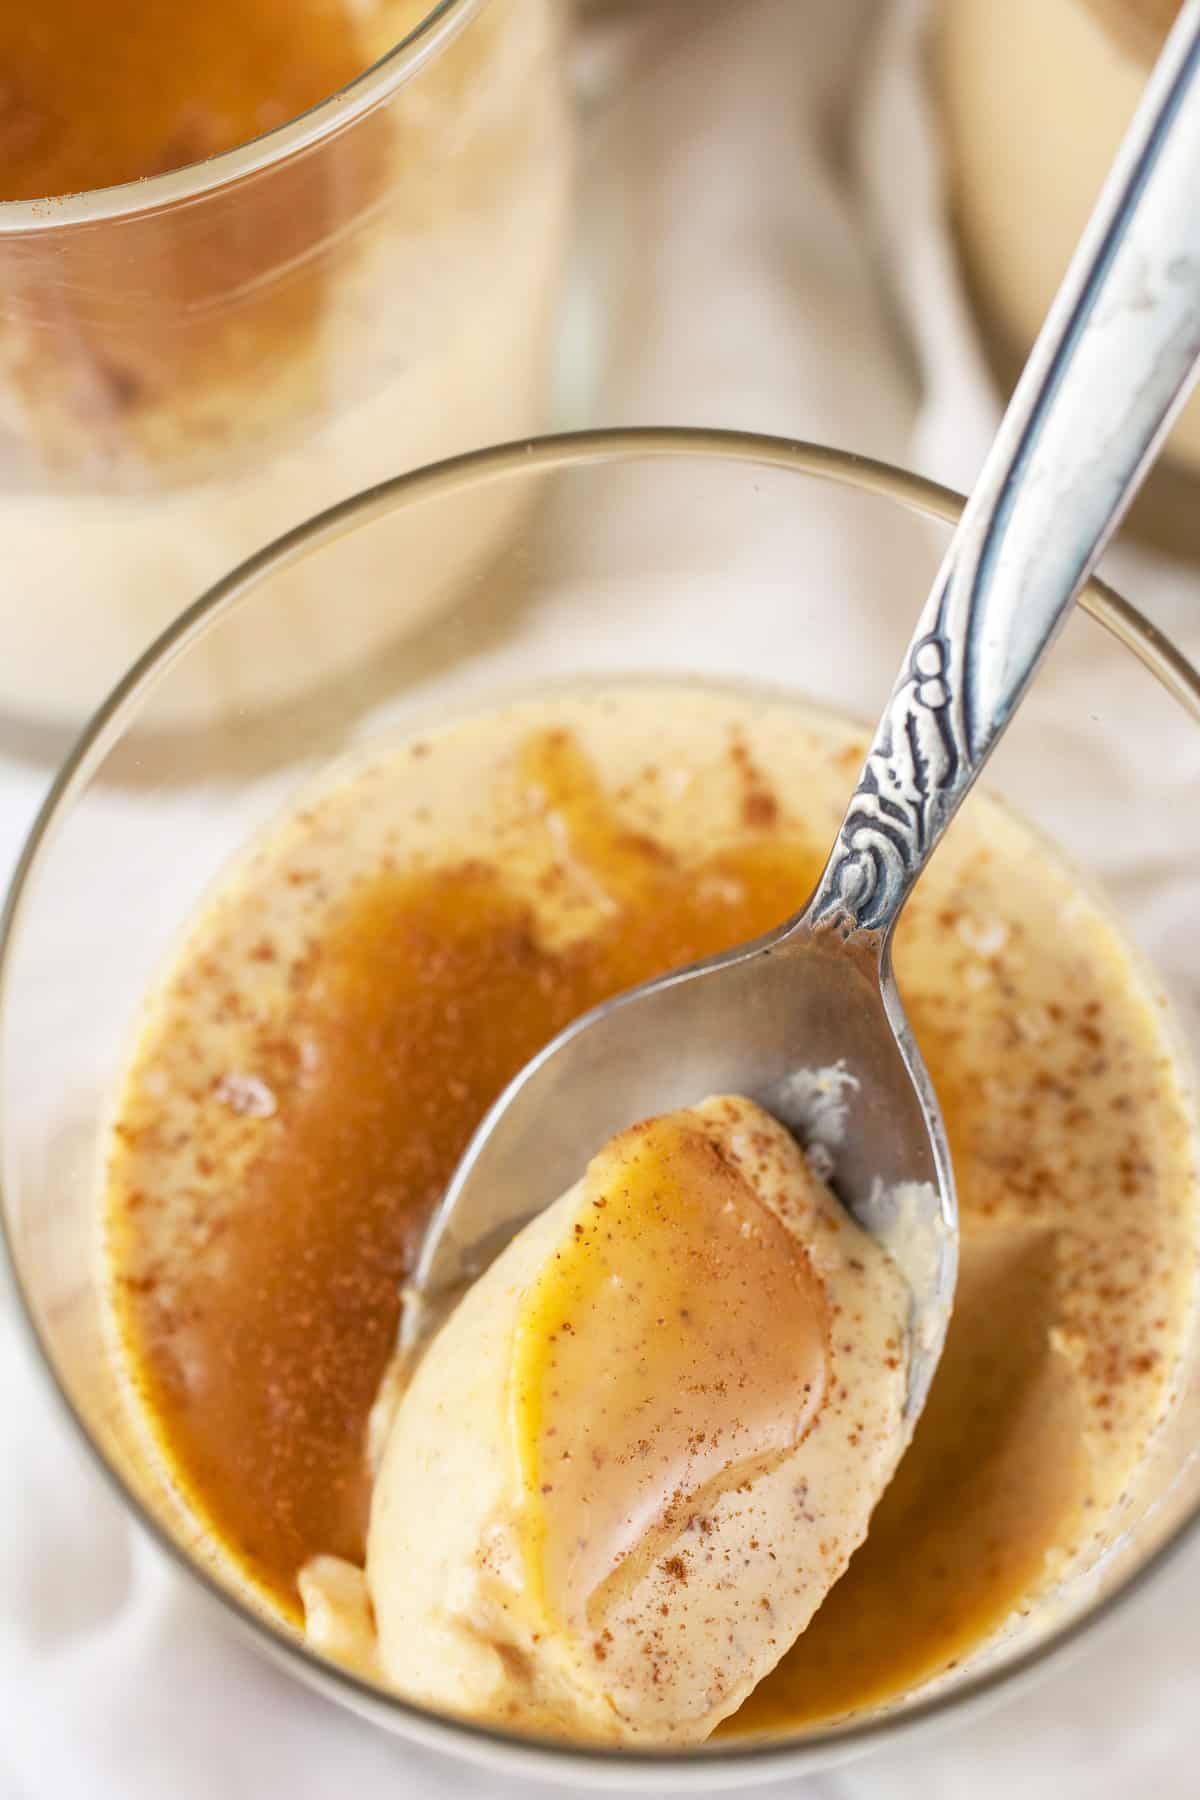 Pumpkin panna cotta with caramel sauce in glass with spoon.